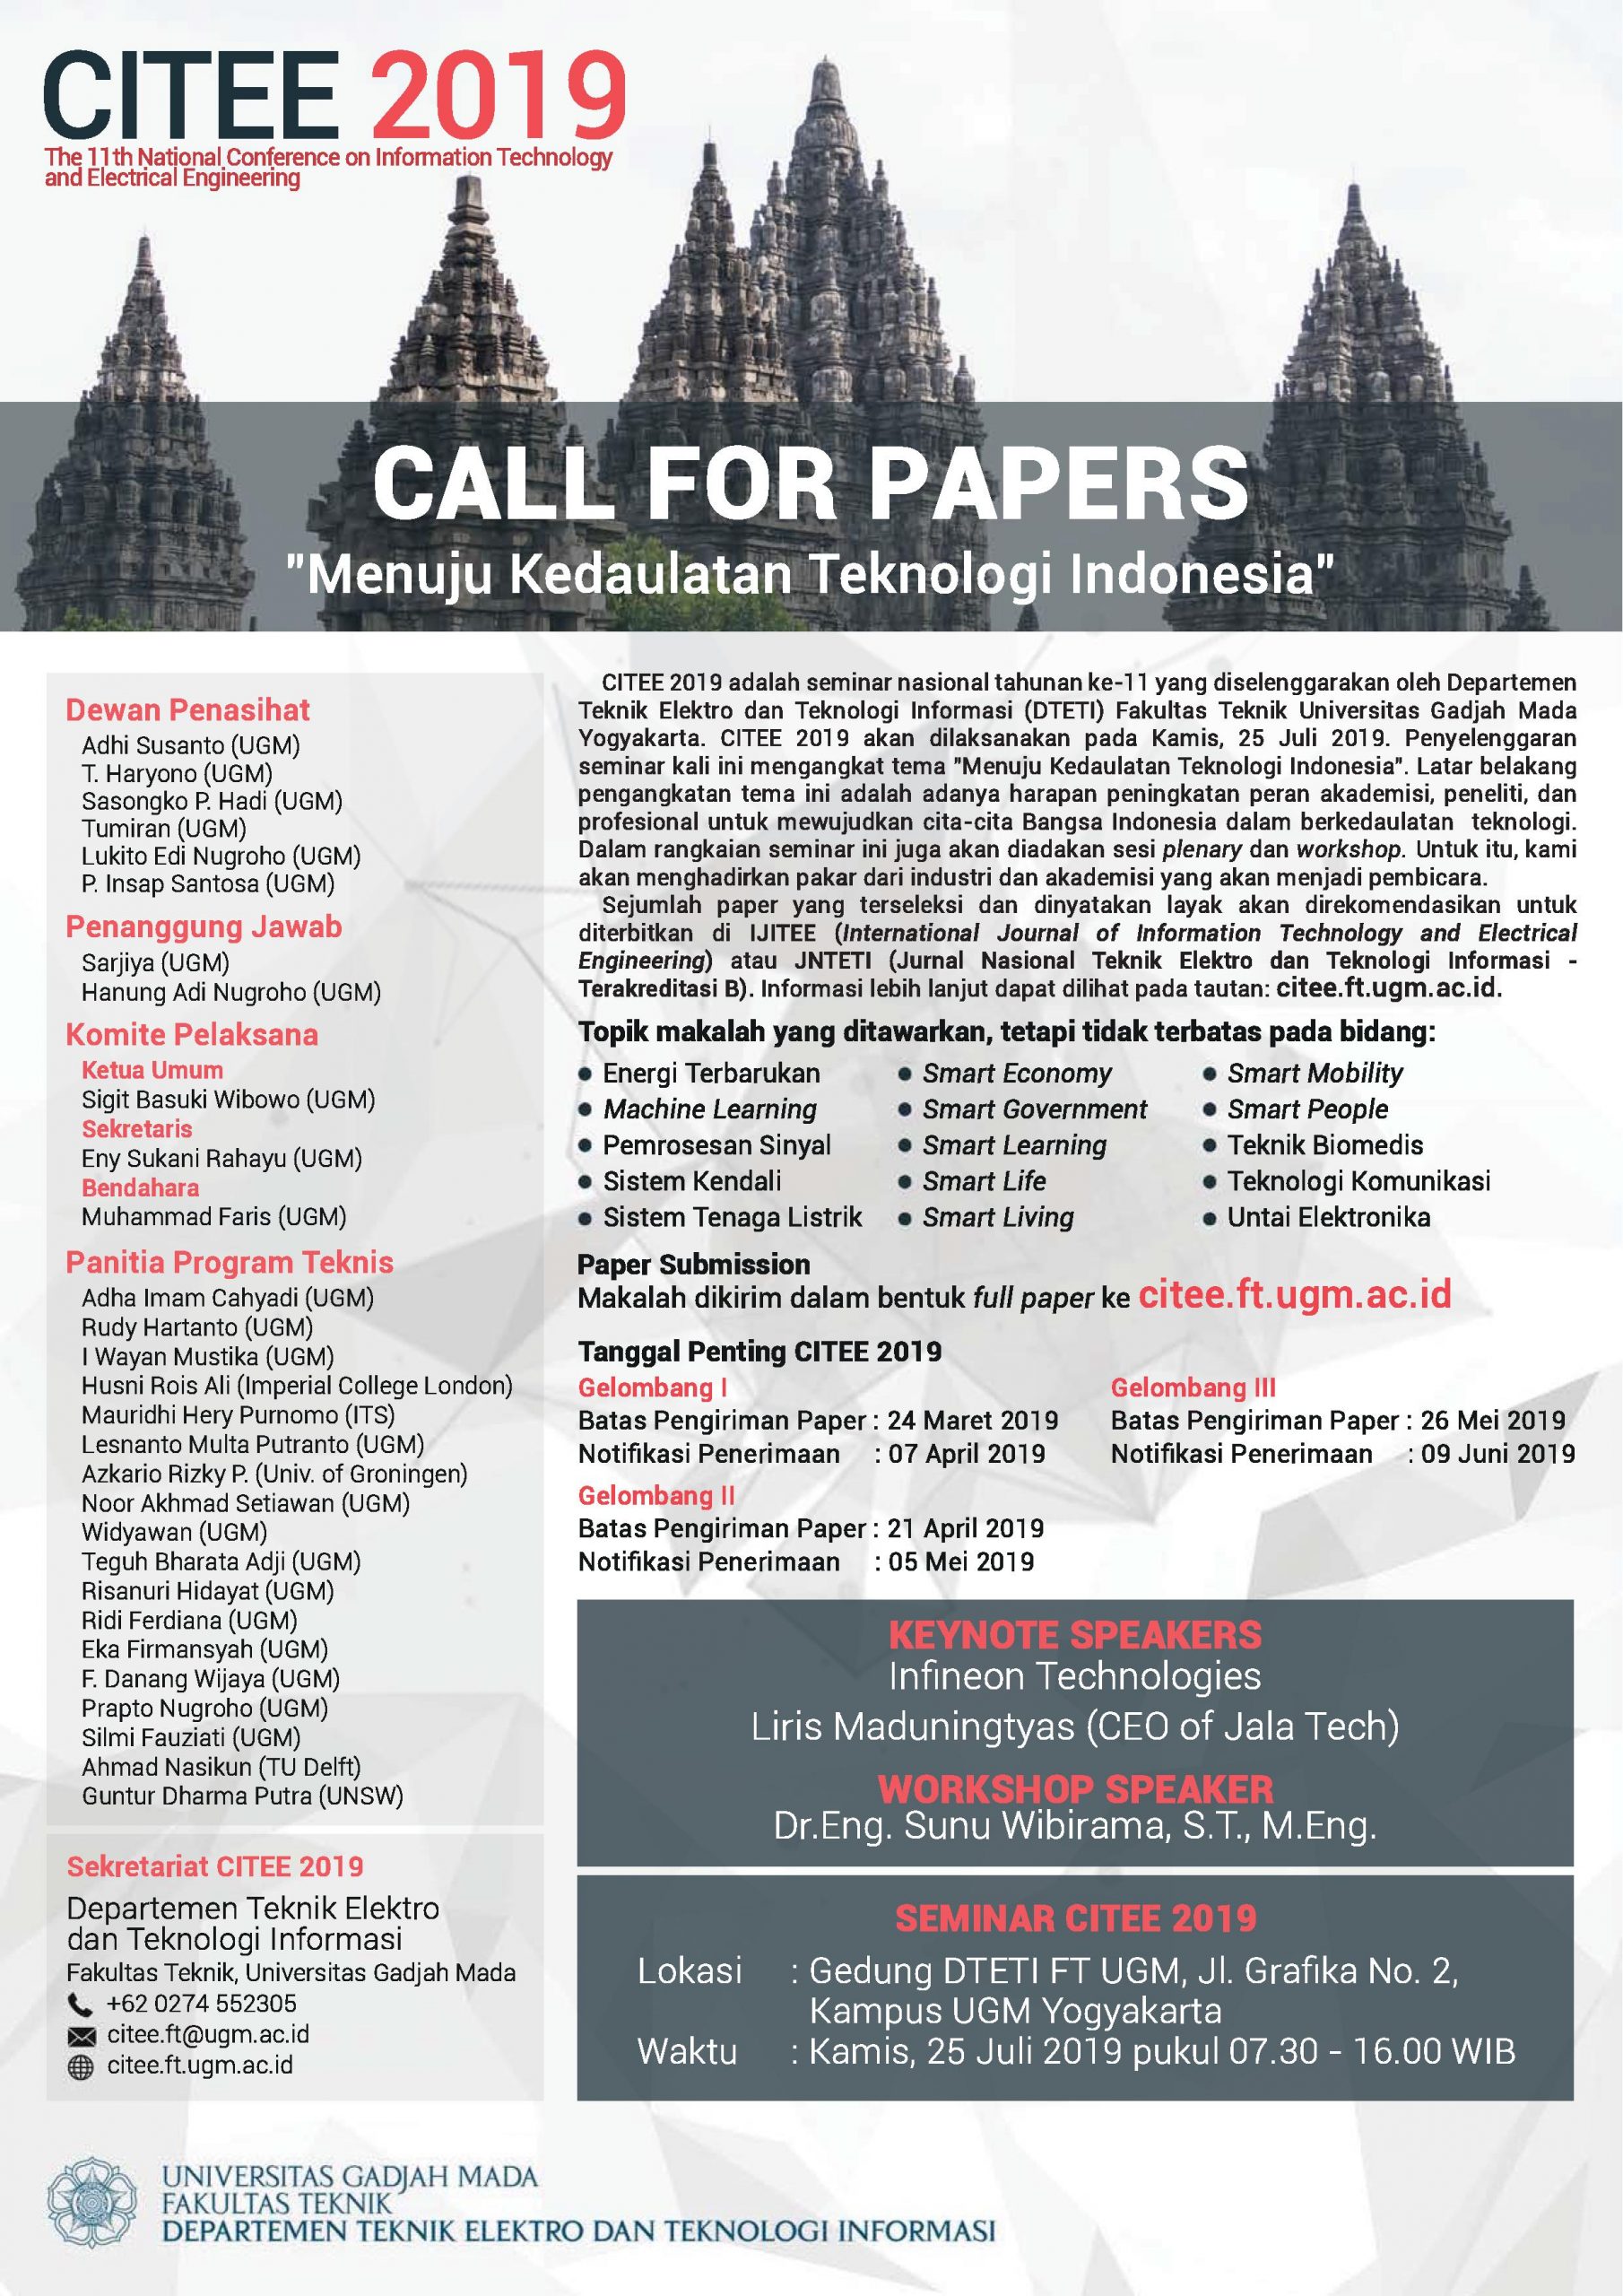 The 11th Conference on Information Technology and Electrical Engineering (CITEE) 2019